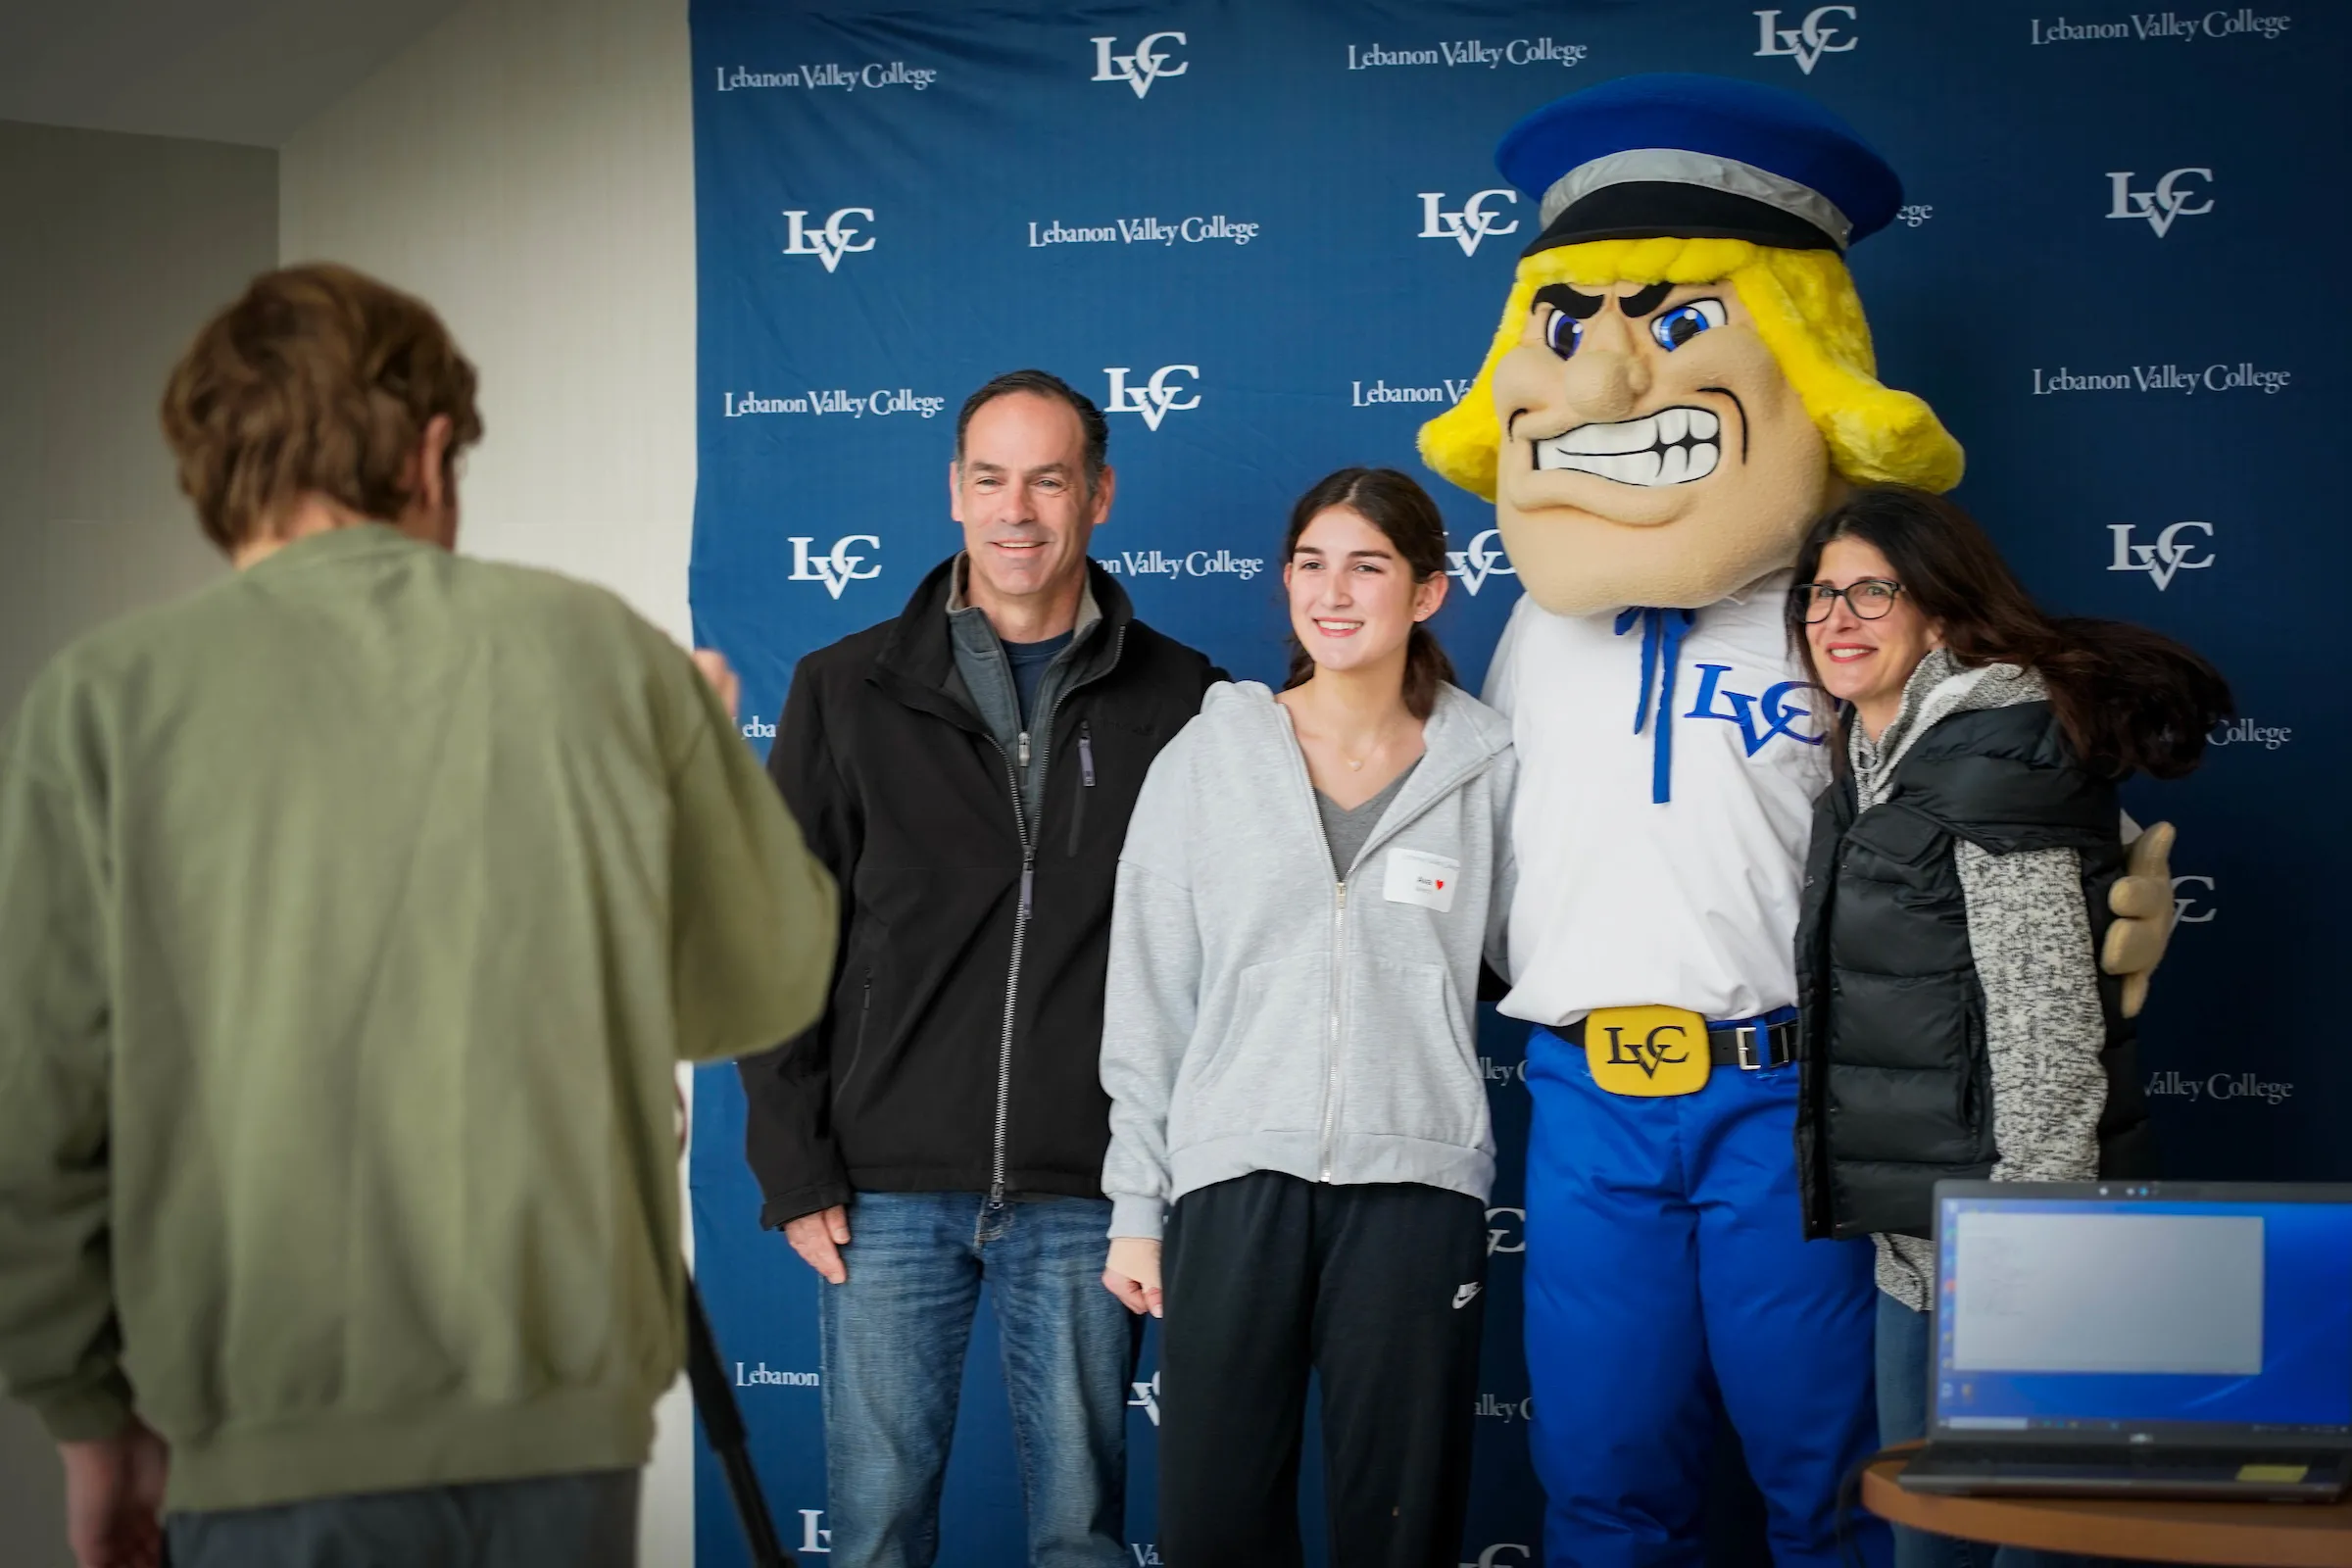 Admitted student and parents pose with Dutchman mascot at LVC Live admitted student event